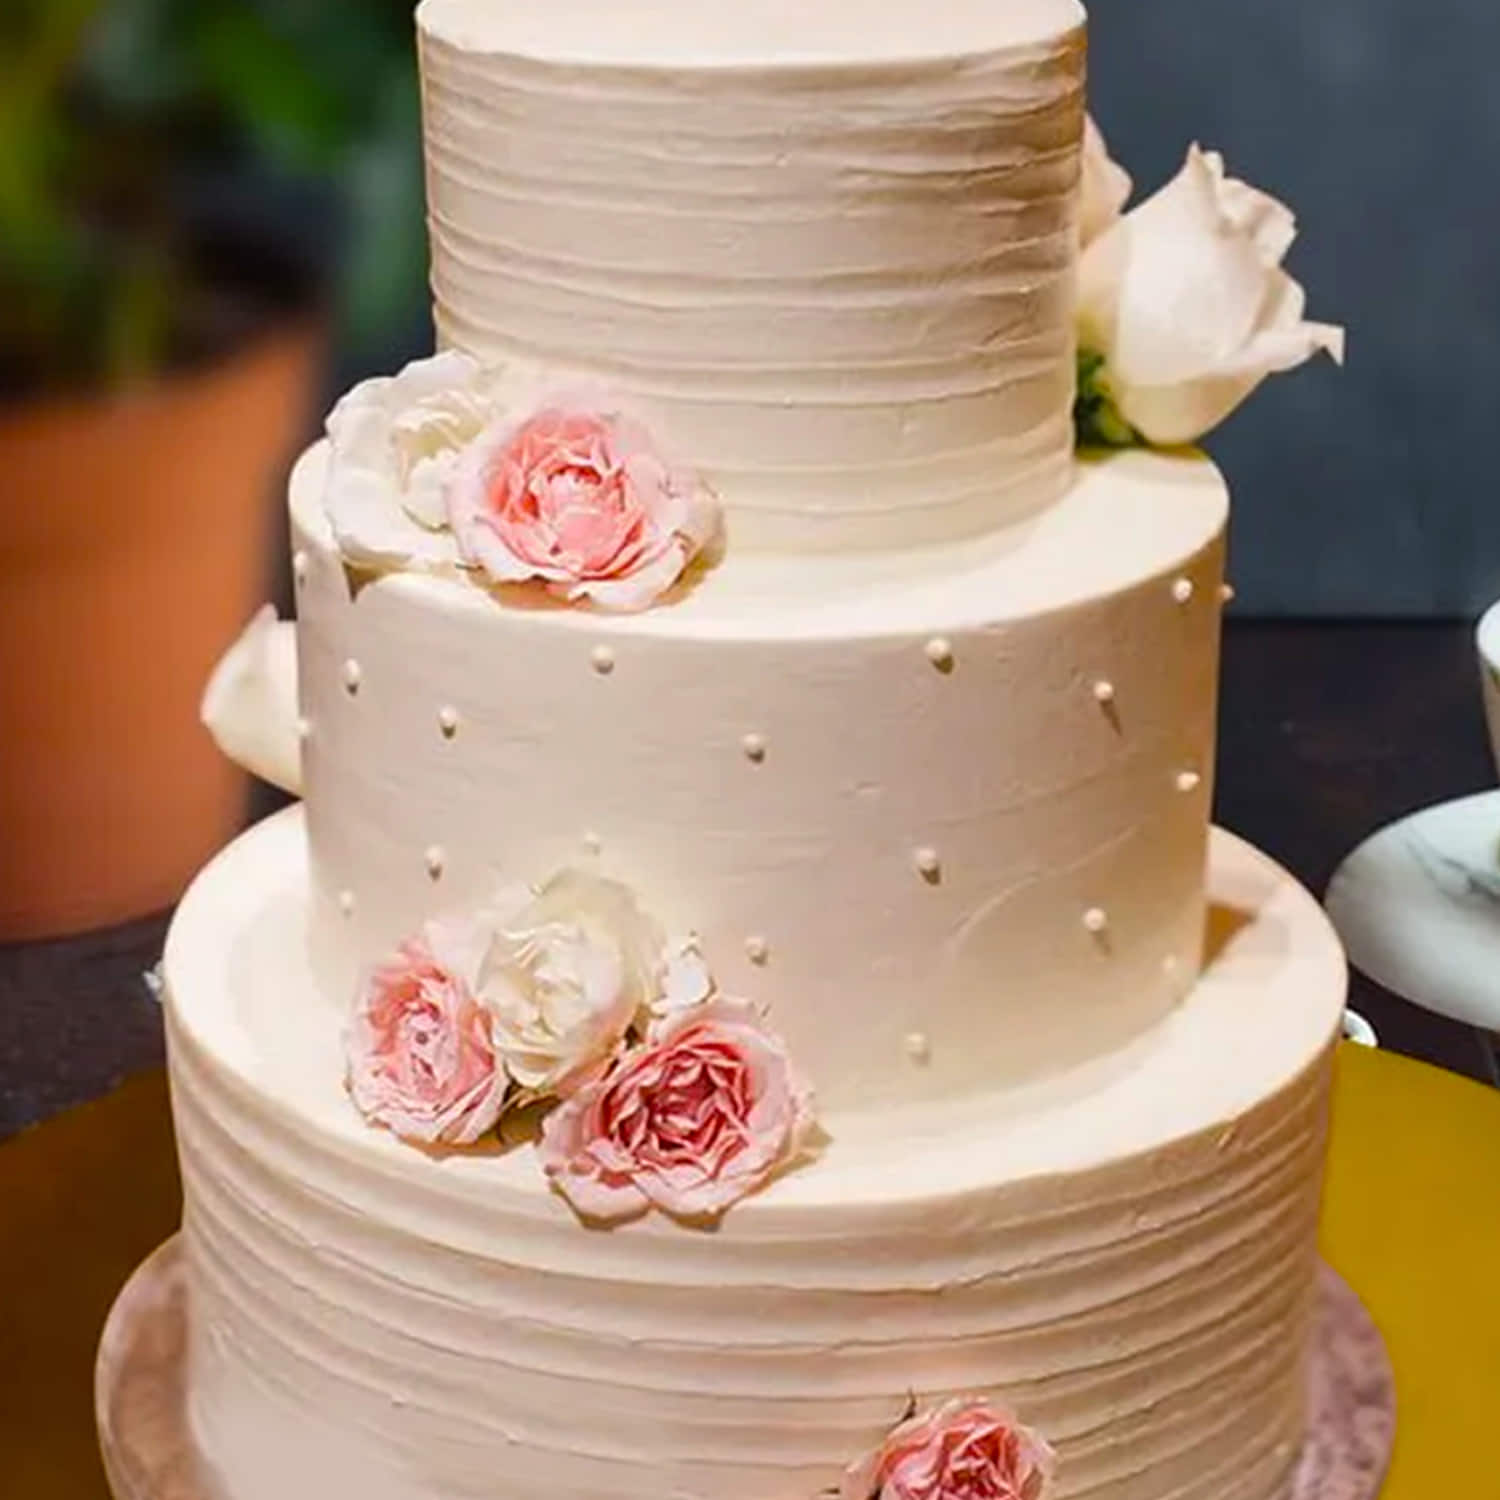 Judge rules in favour of Christian baker after she refused to make wedding  cake for same-sex couple